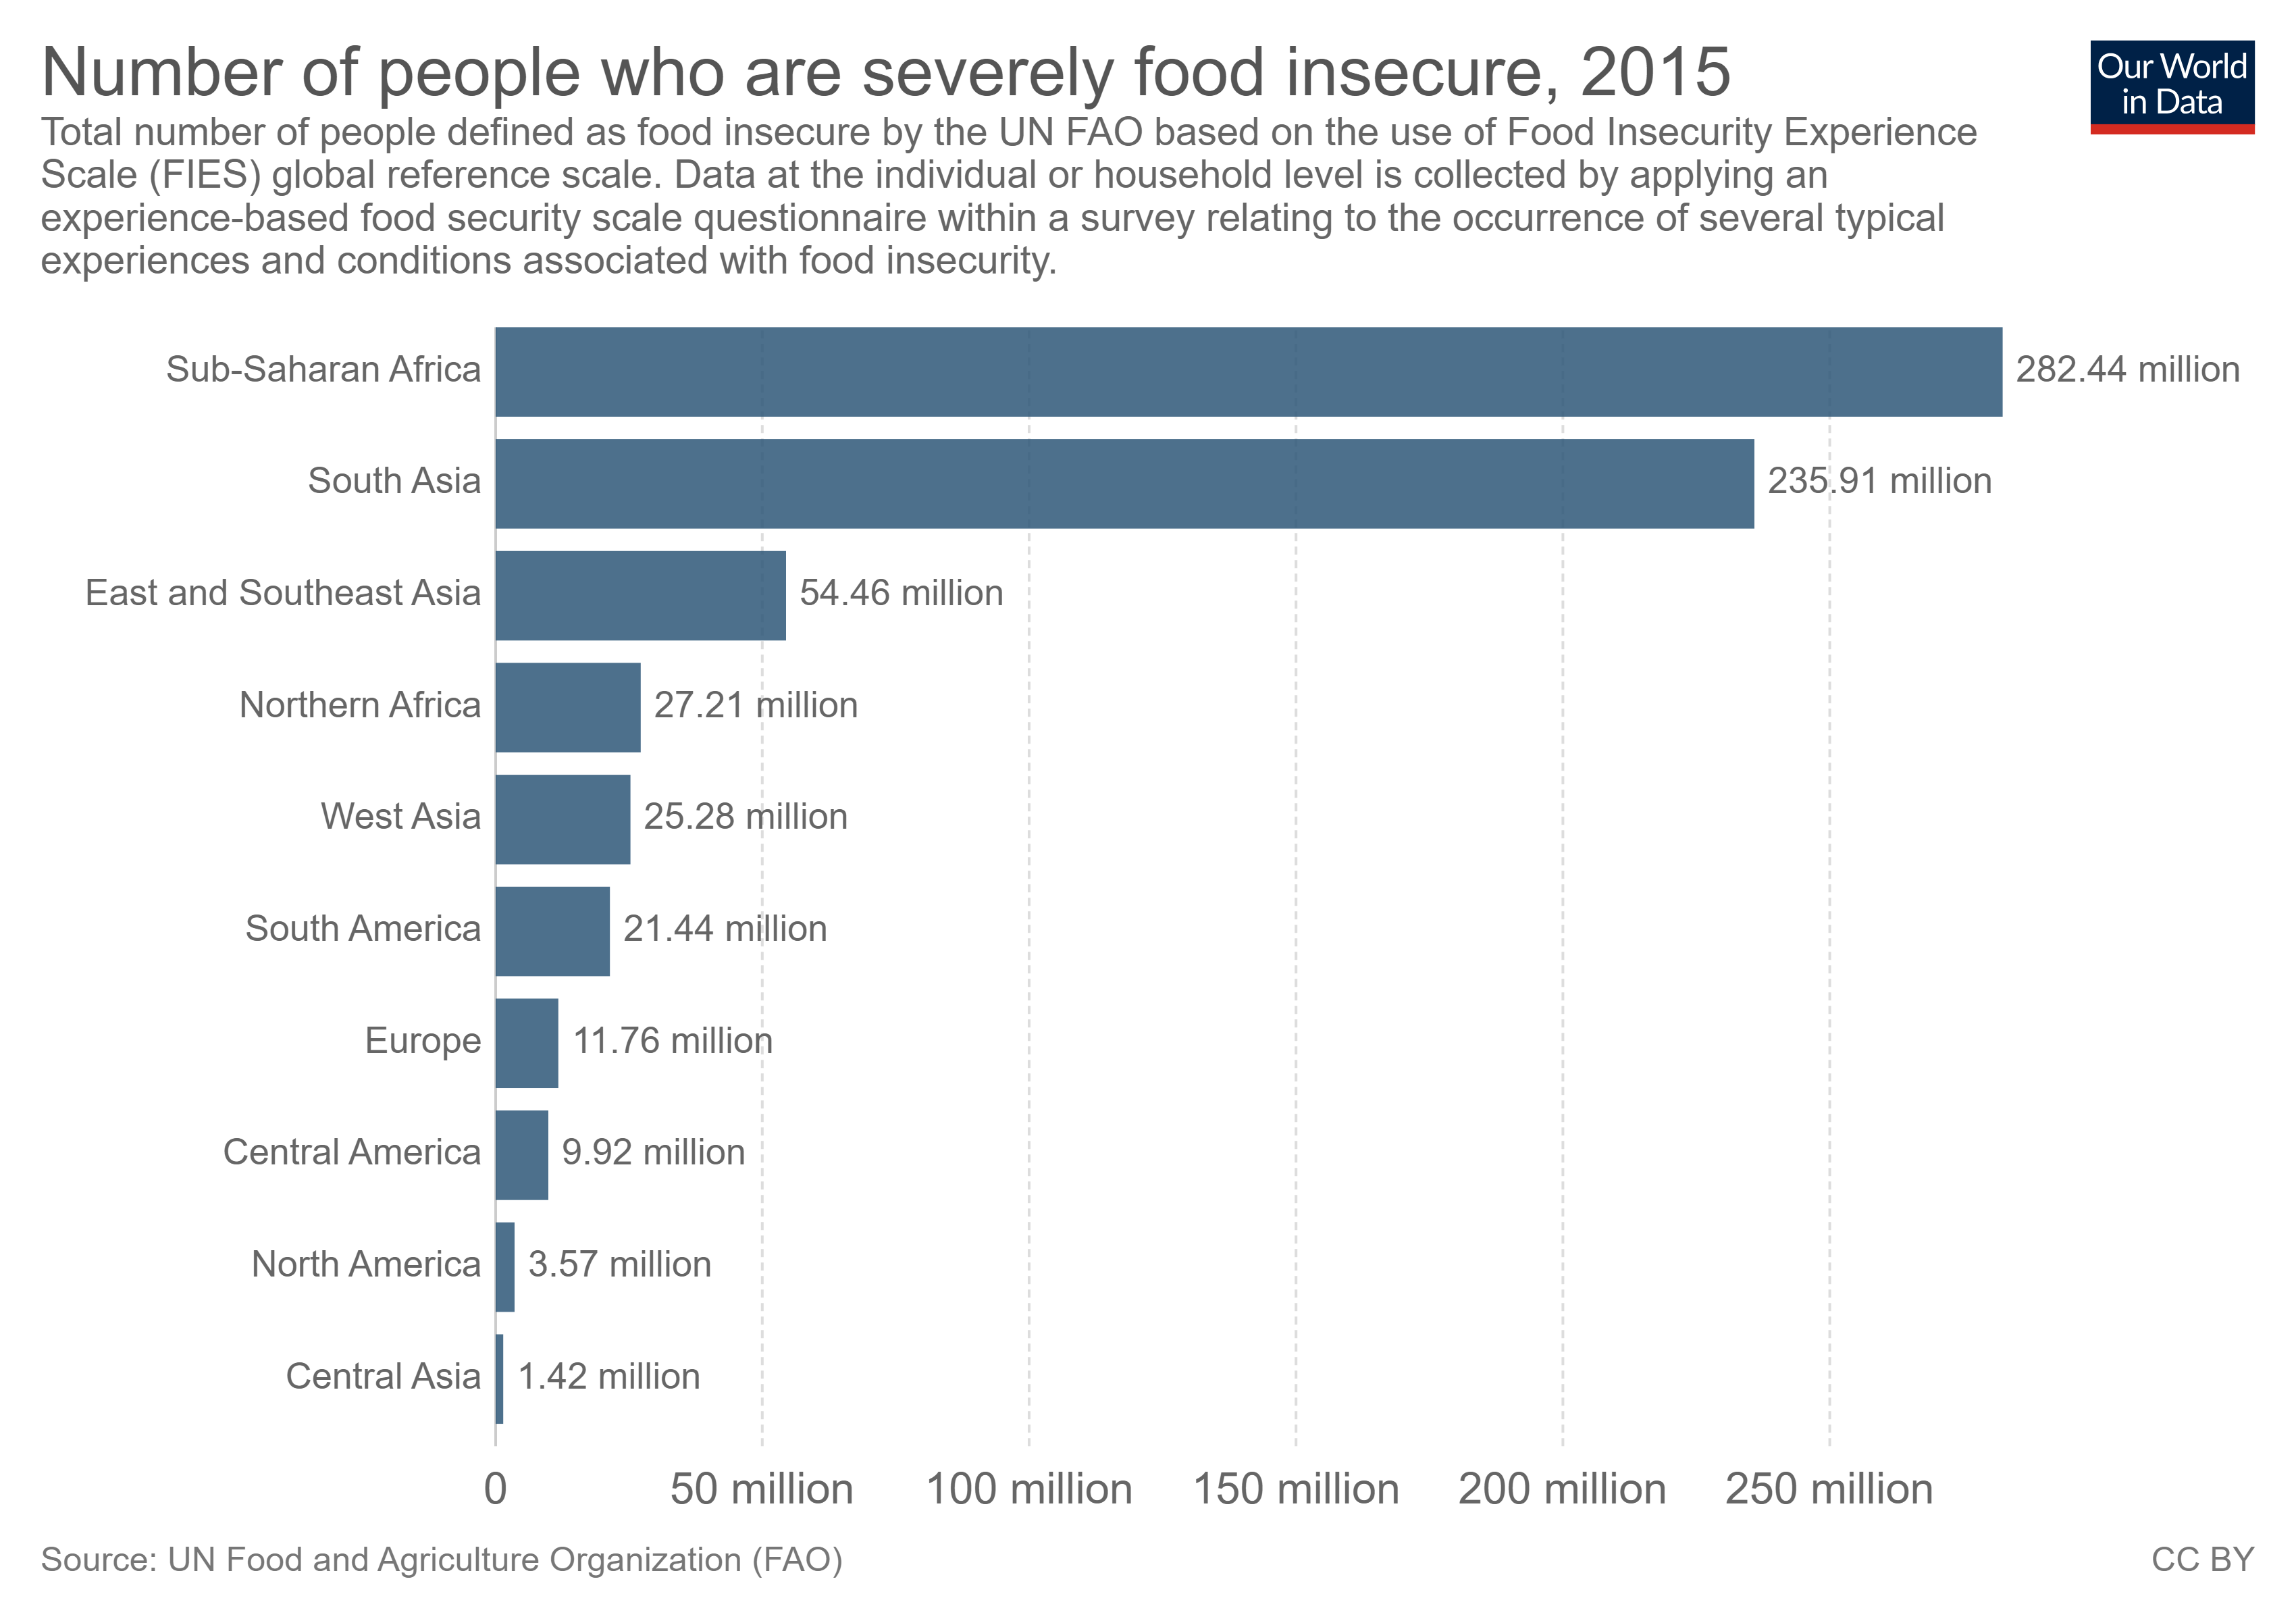 Number-of-people-severely-food-insecure.png